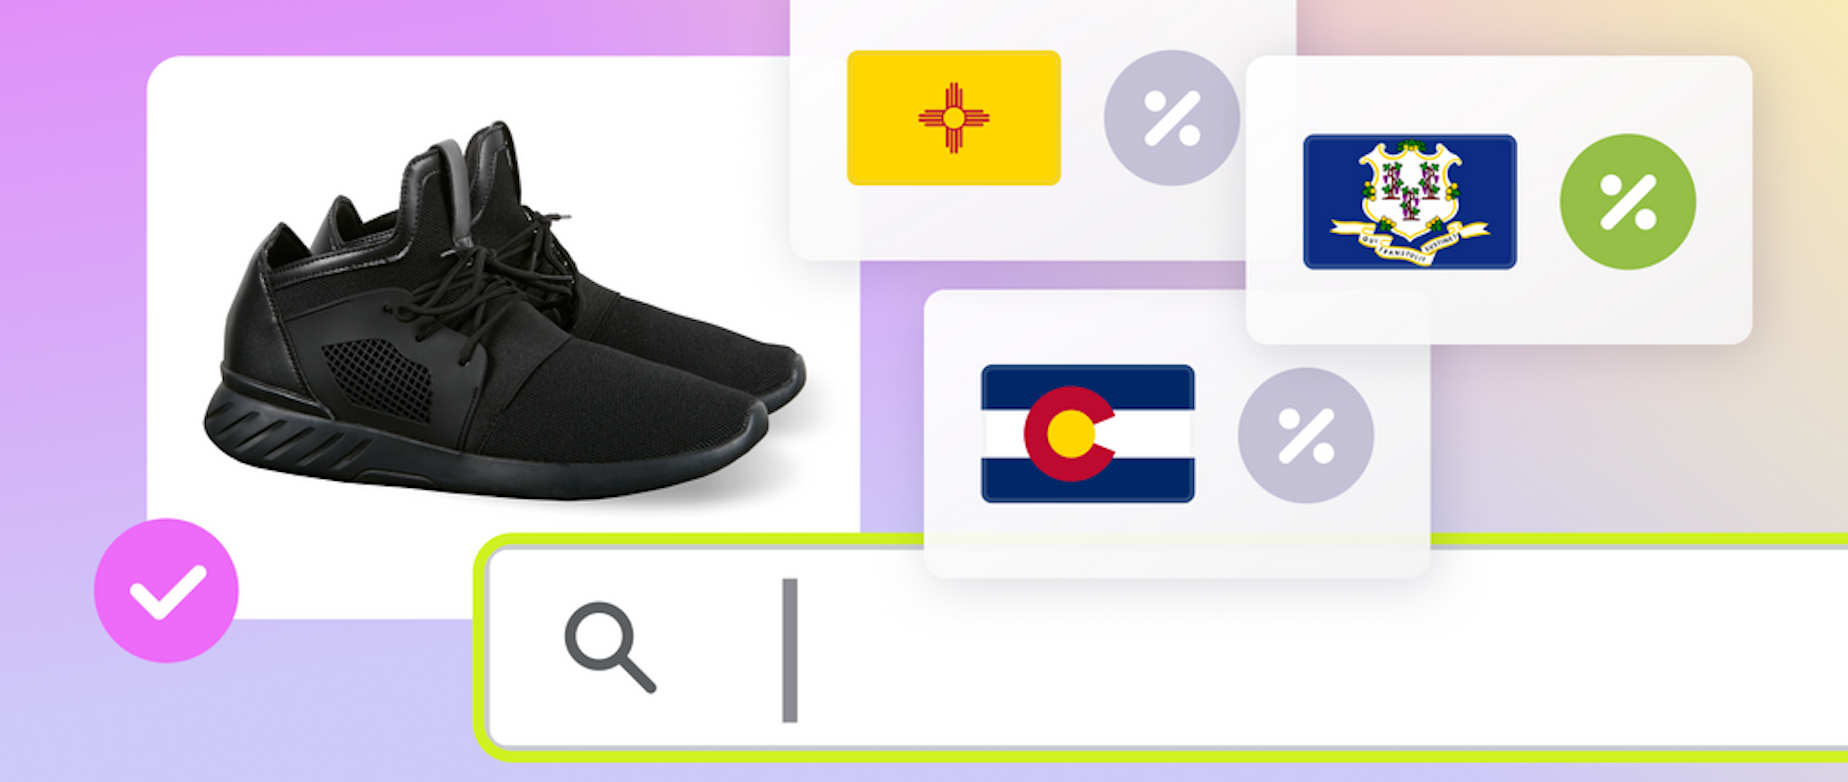 Black sneakers beside a search bar and three state flags.